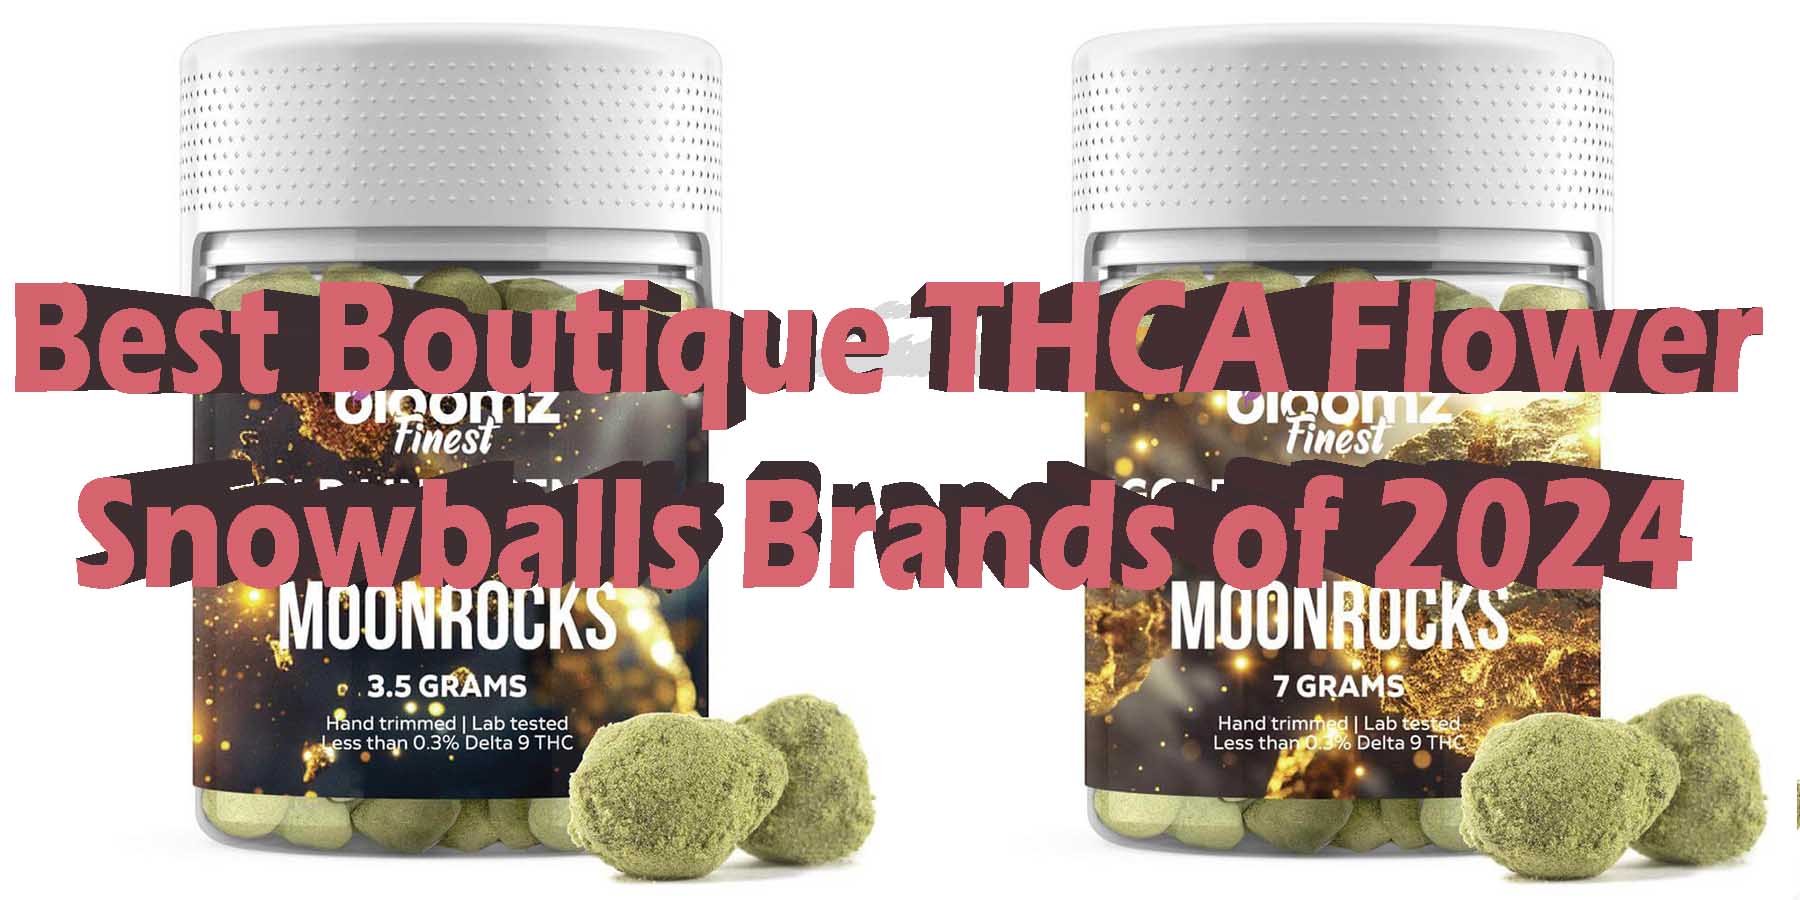 Best Boutique THCA Flower Snowballs Brands of 2024 LowestPrice Coupon Discount For-Smoking Best High Smoke Shop Online Near Me Online Smoke Shop StrongestBrand Best Bloomz.